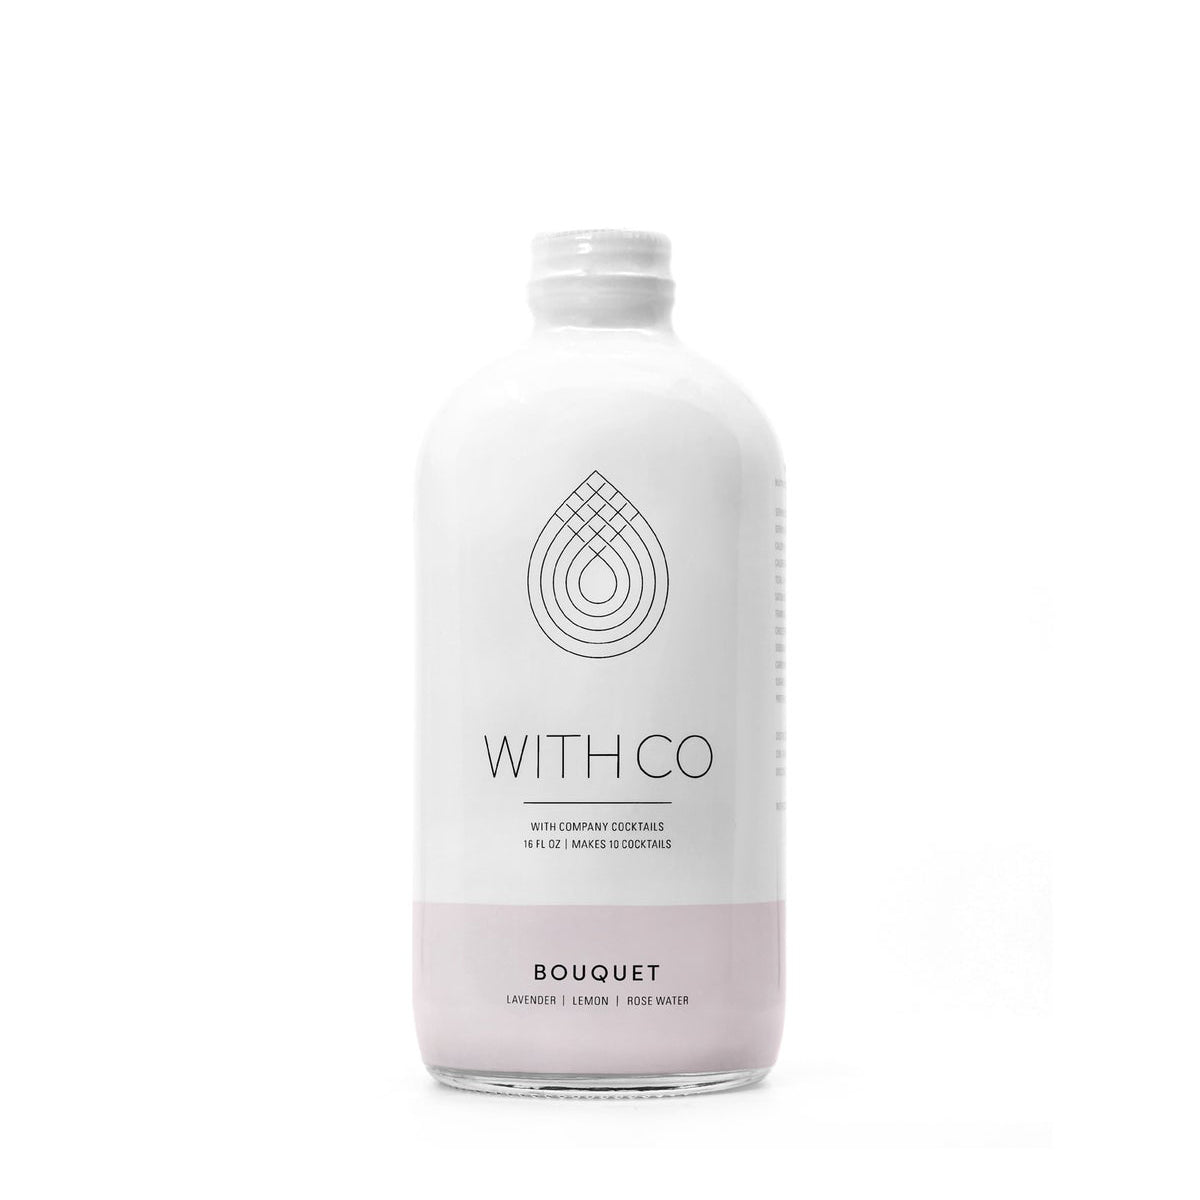 WITHCO - BOUQUET